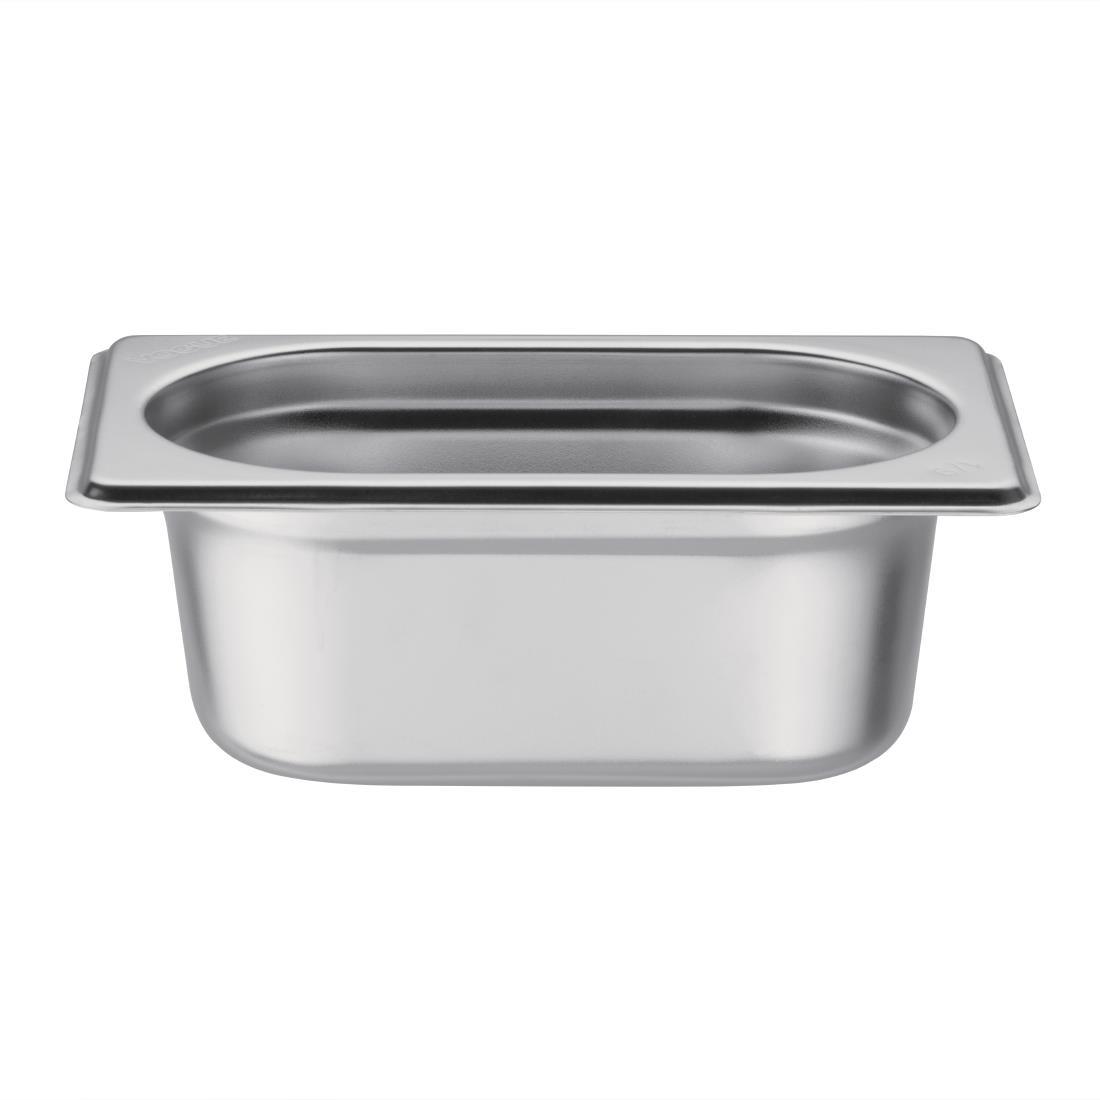 Vogue Stainless Steel 1/9 Gastronorm Pan 65mm - K824  - 2